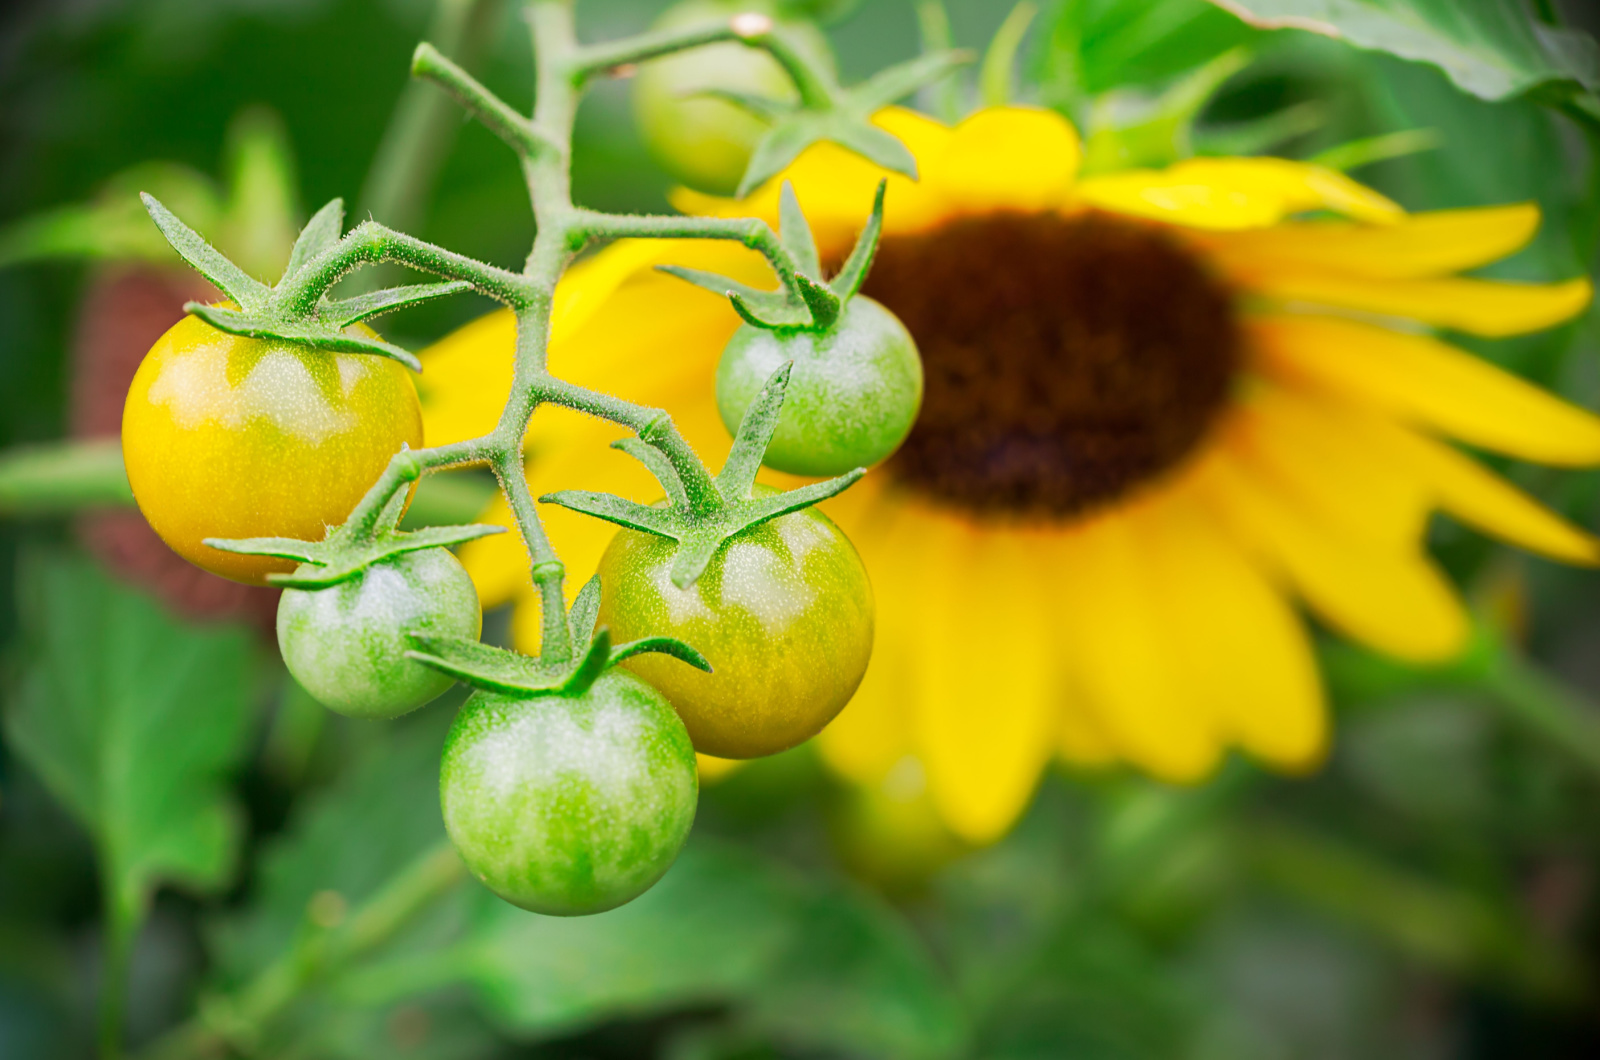 unripe tomatoes on a stem and a sunflower